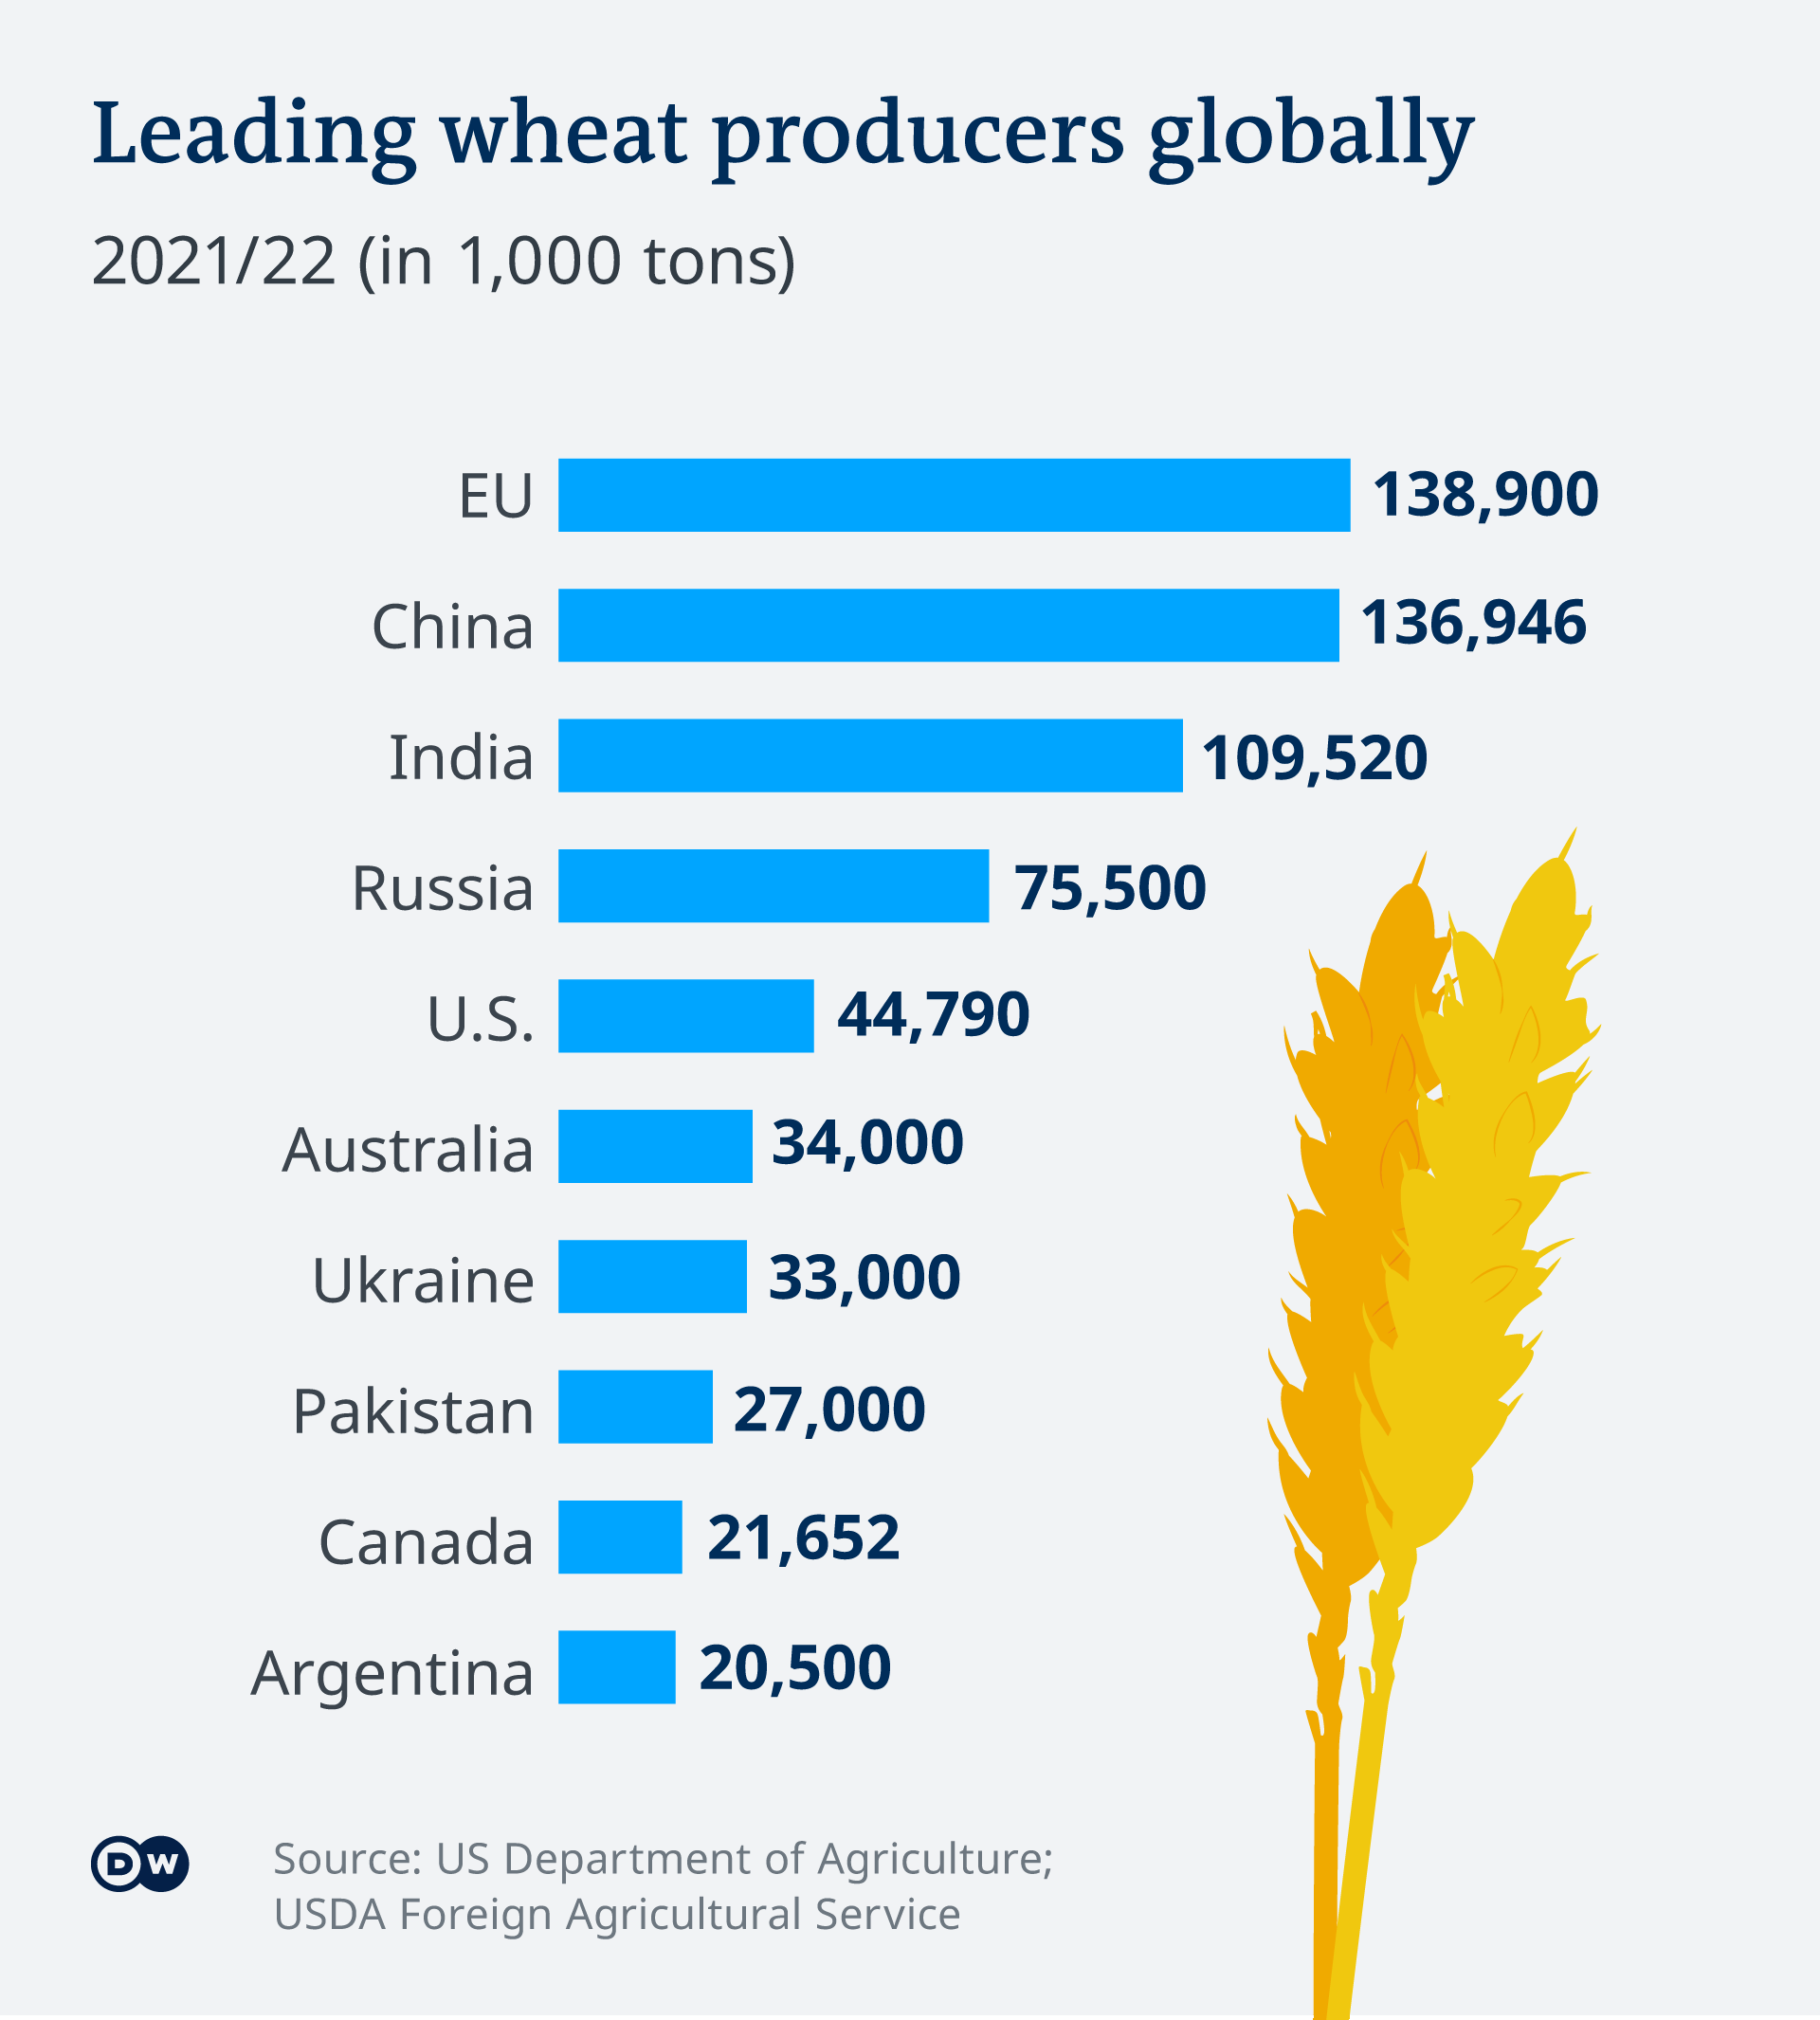 Infographic showing a list of the top 10 wheat producers in the world in 2021/22